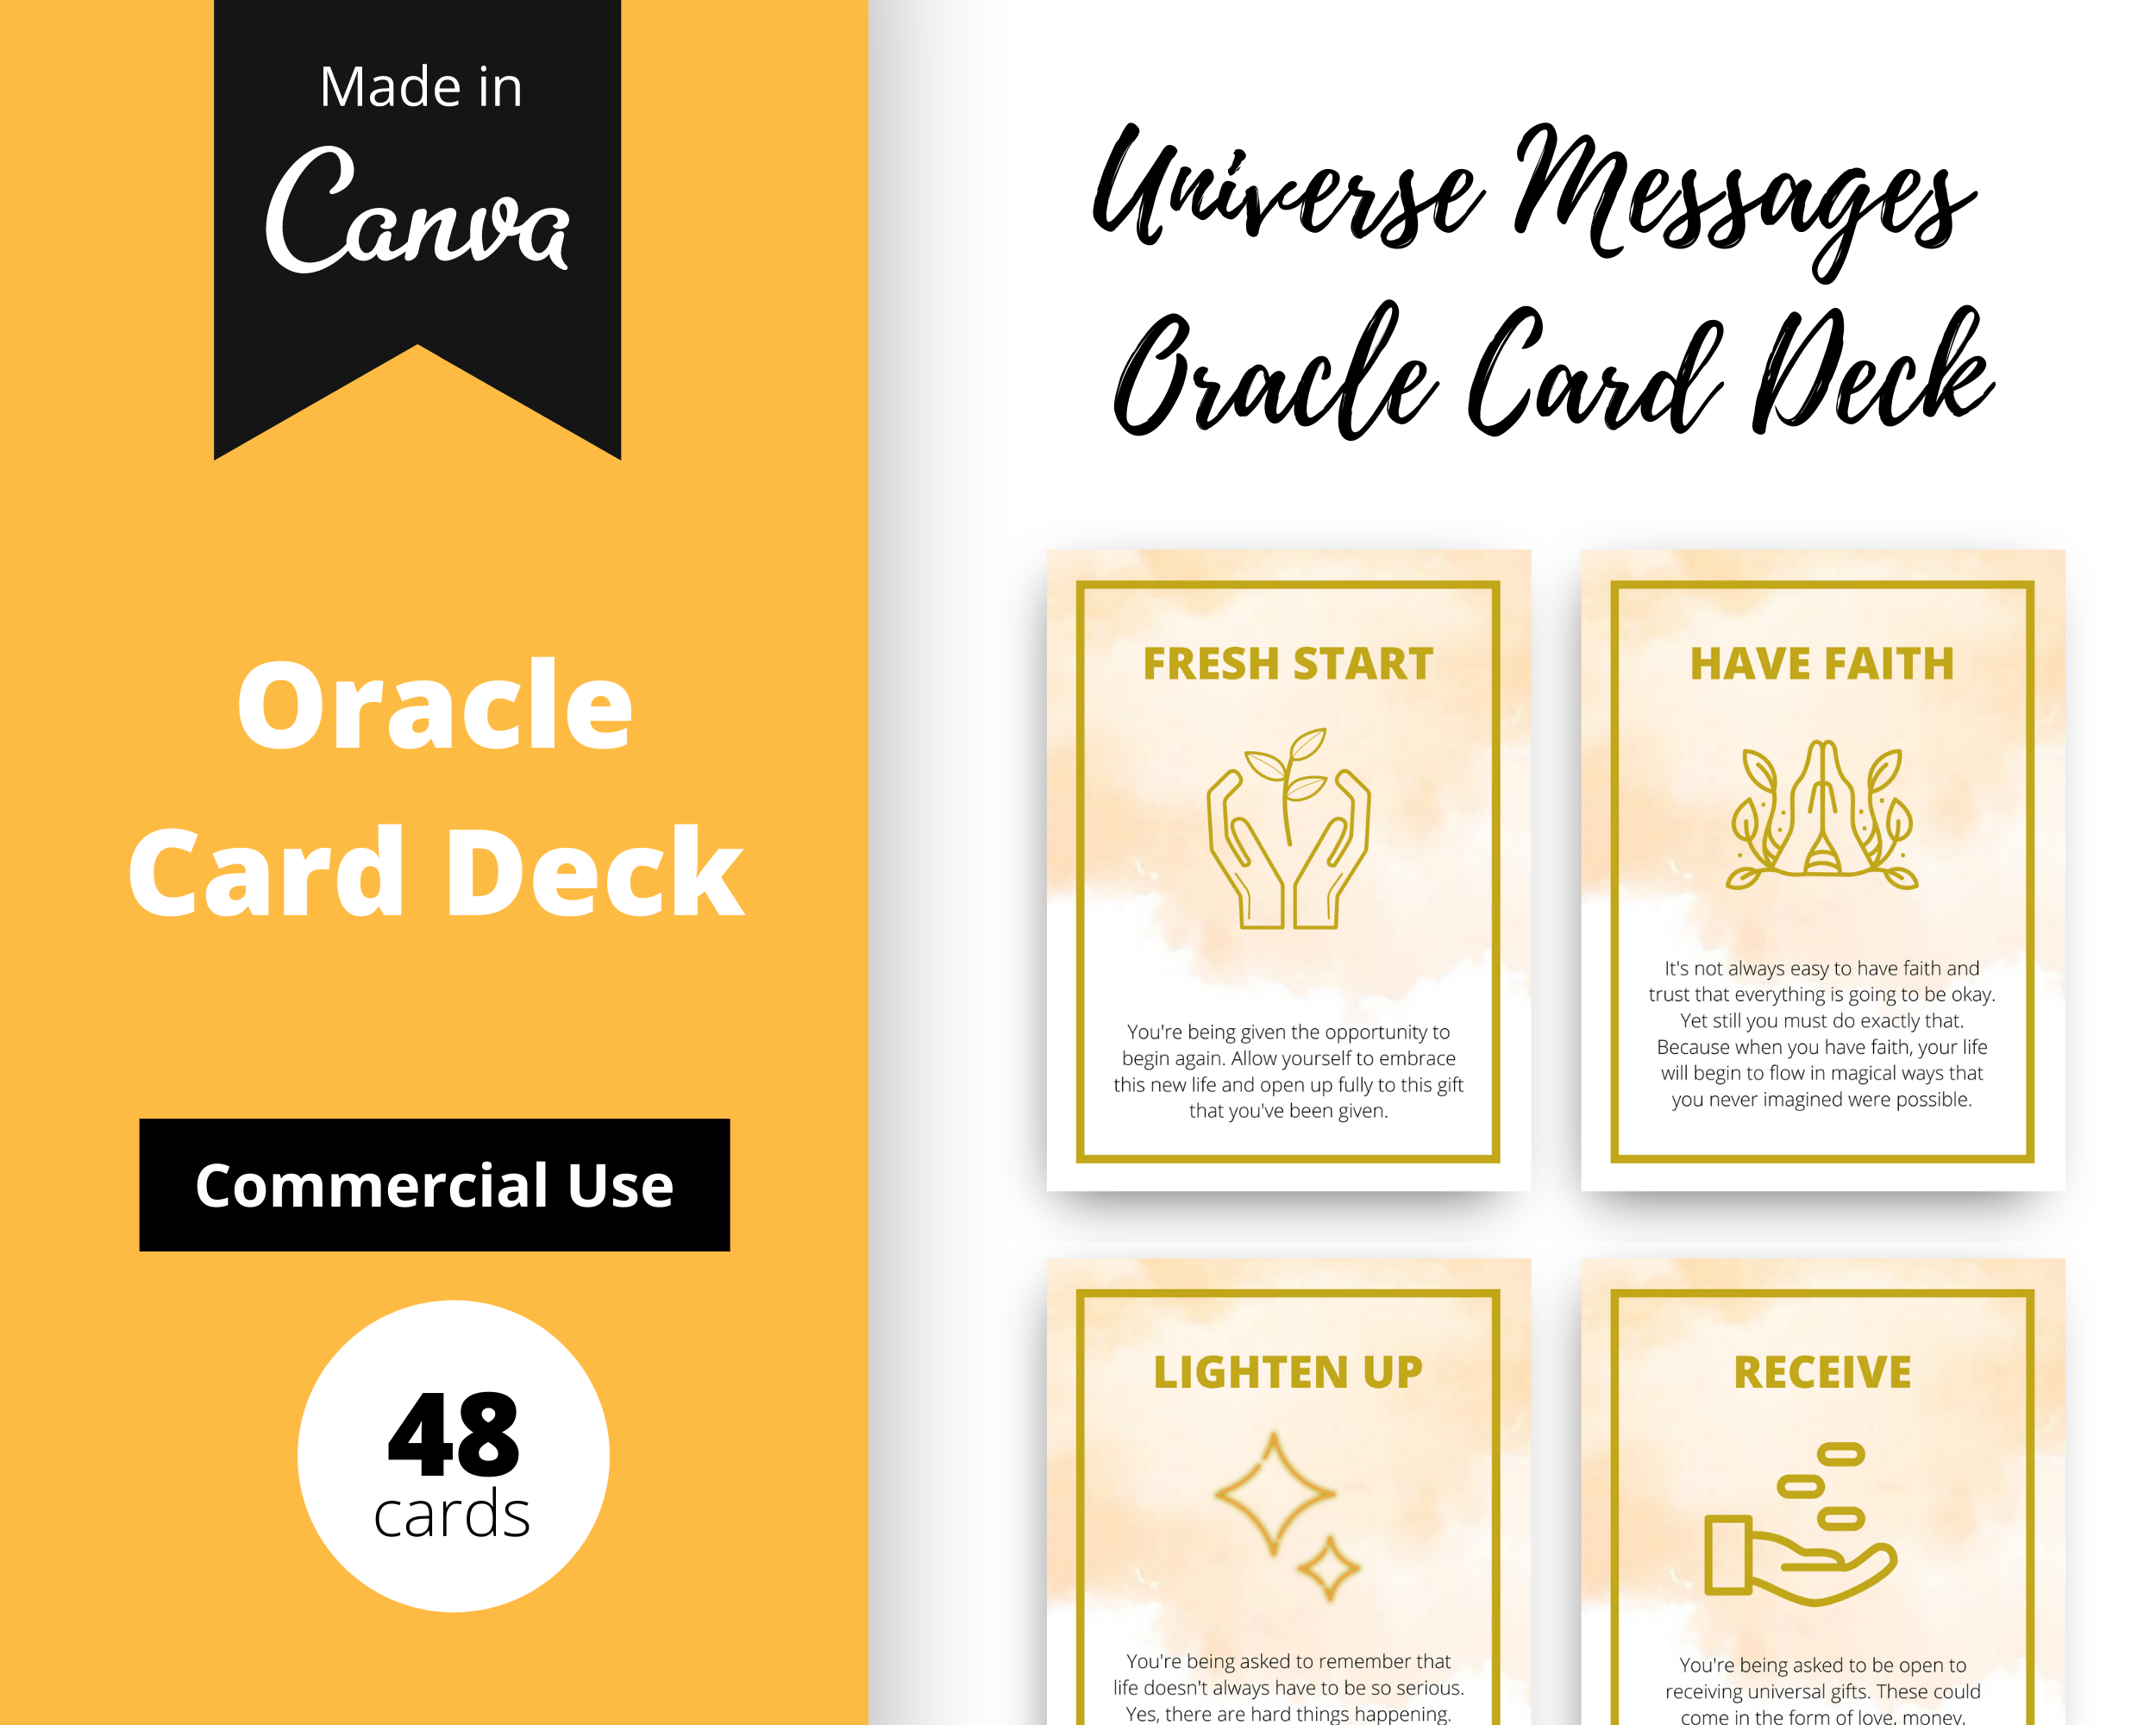 Universe Messages Oracle Card Deck | Editable 48 Card Deck in Canva | Size 3"x4" | Commercial Use